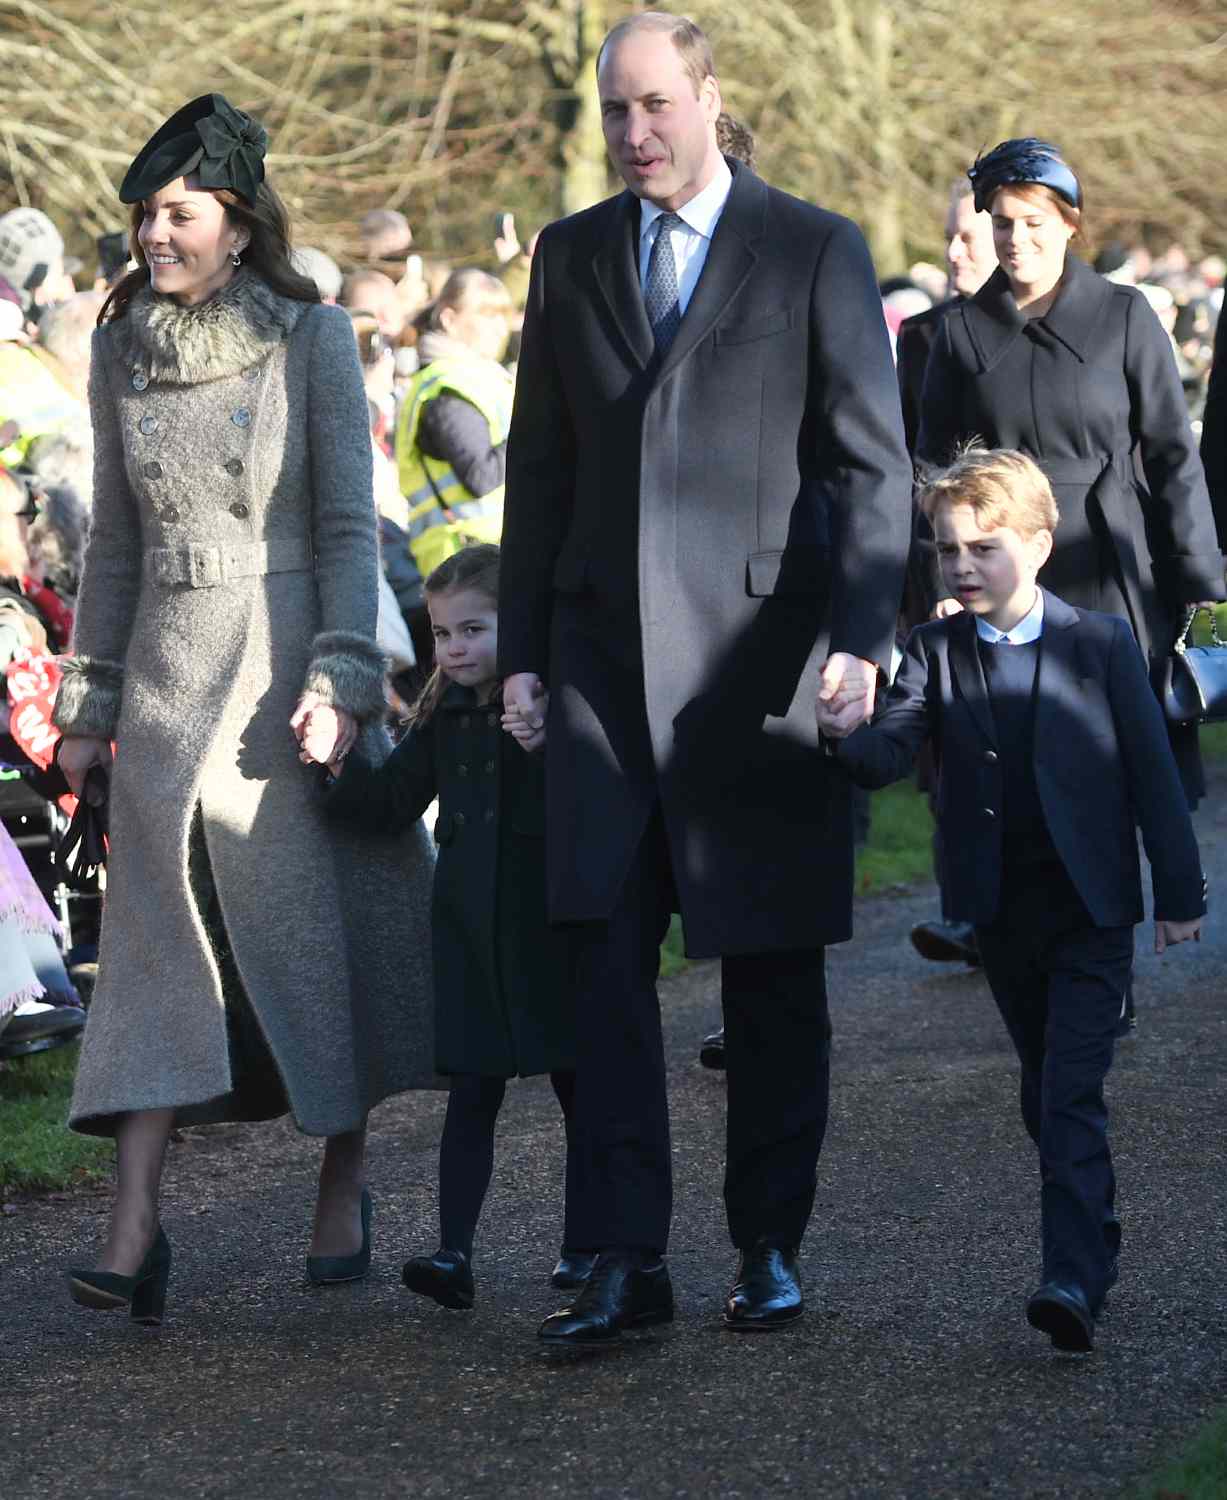 The Duke and Duchess of Cambridge and their children Prince George and Princess Charlotte arriving to attend the Christmas Day morning church service at St Mary Magdalene Church in Sandringham, Norfolk. (Photo by Joe Giddens/PA Images via Getty Images)